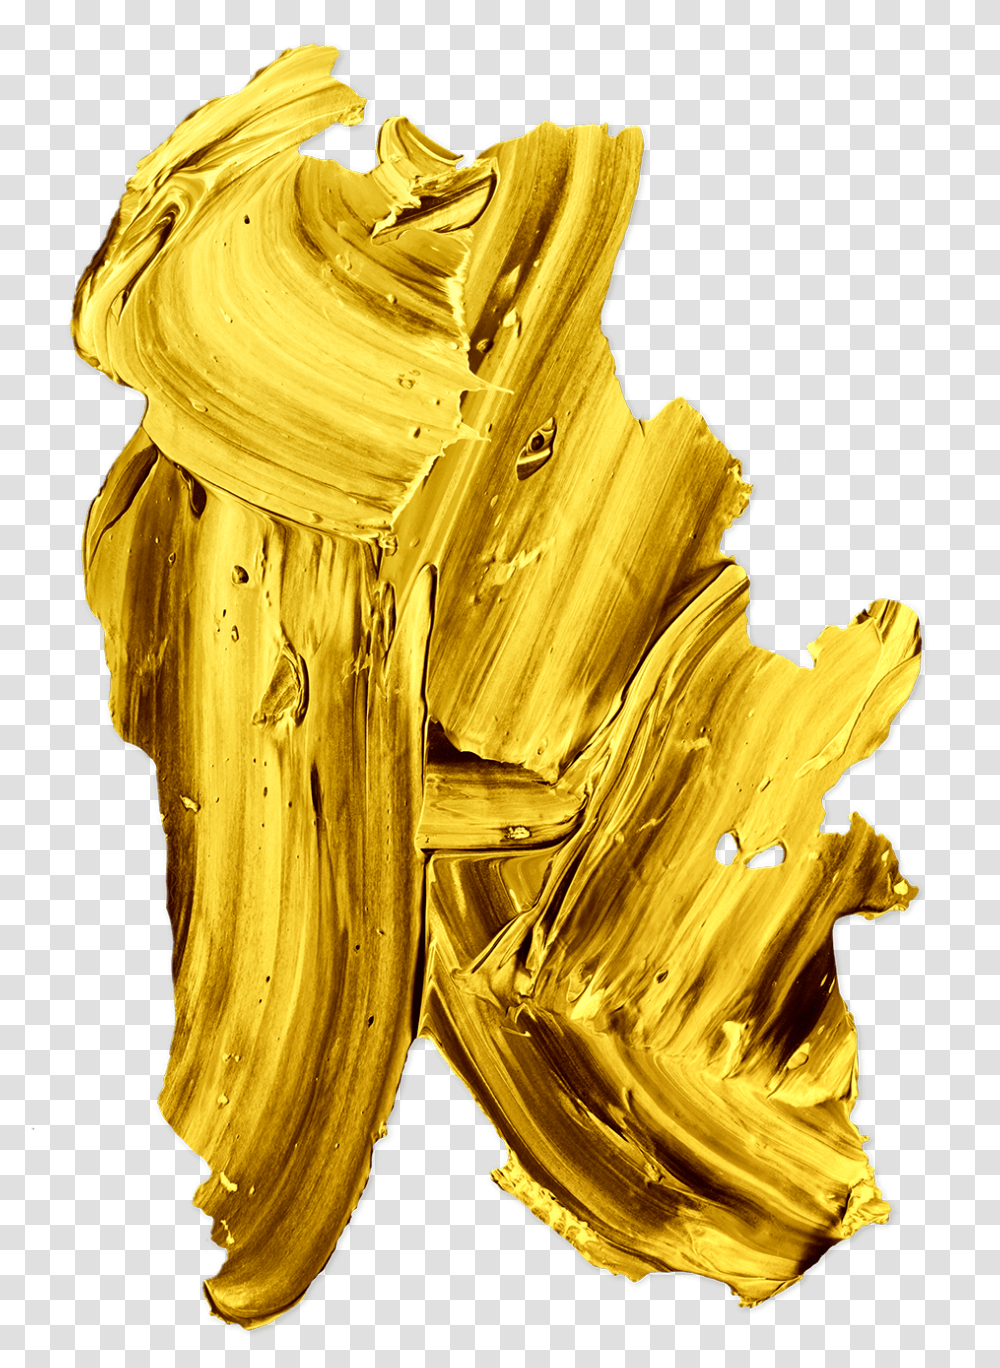 Gold And Black Paint, Plant, Texture, Food, Sweets Transparent Png